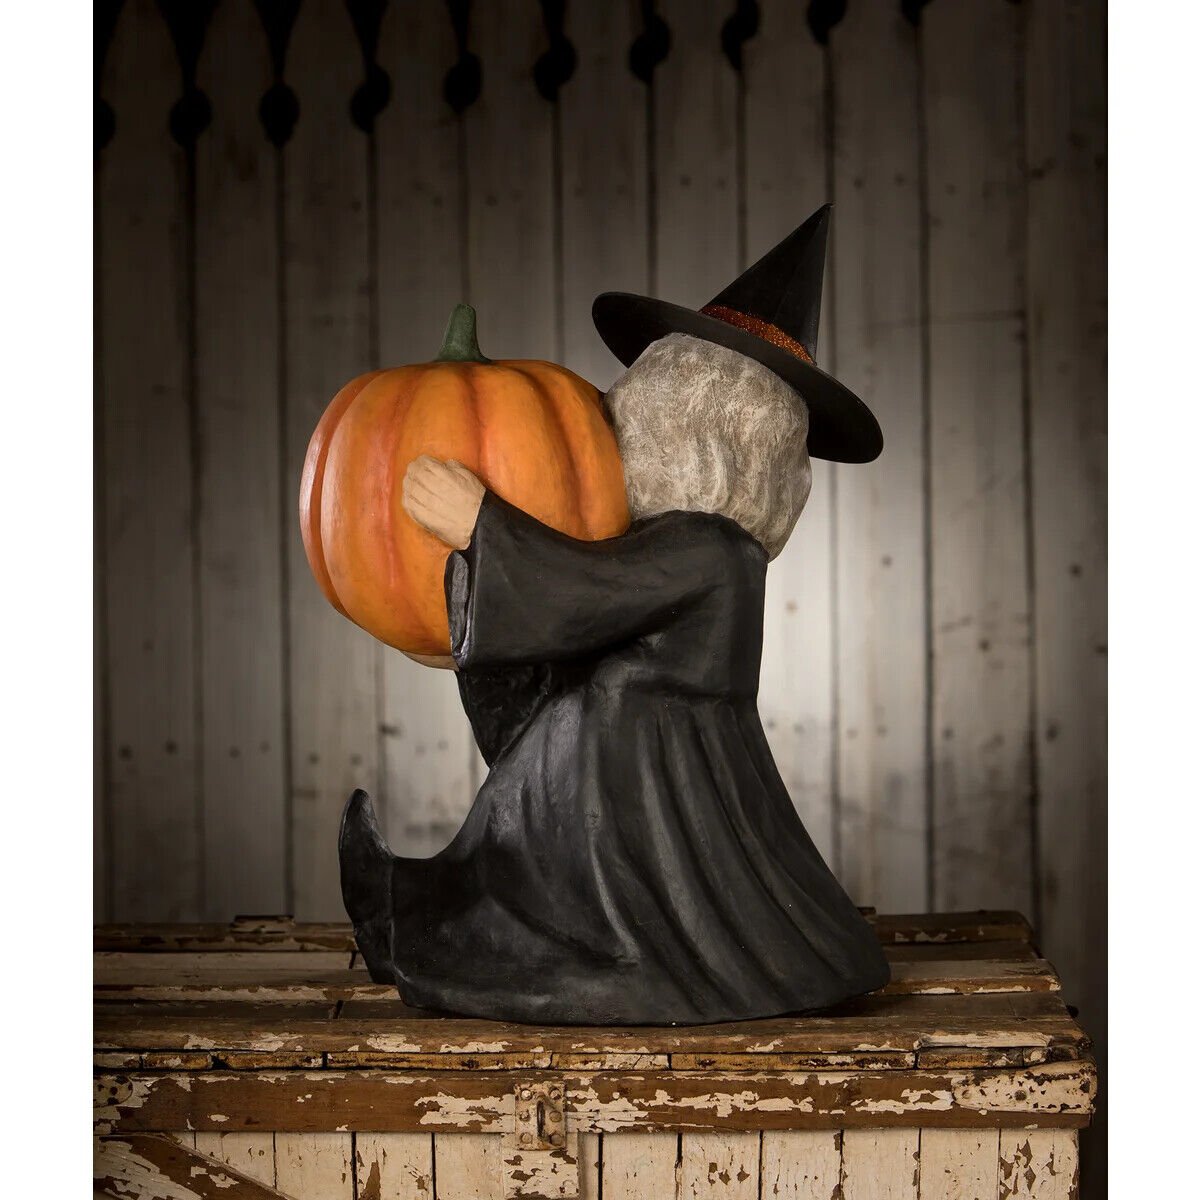 Bethany Lowe Halloween New 2023 Witch w/ Large Pumpkin Luminary TJ2325 - The Primitive Pineapple Collection